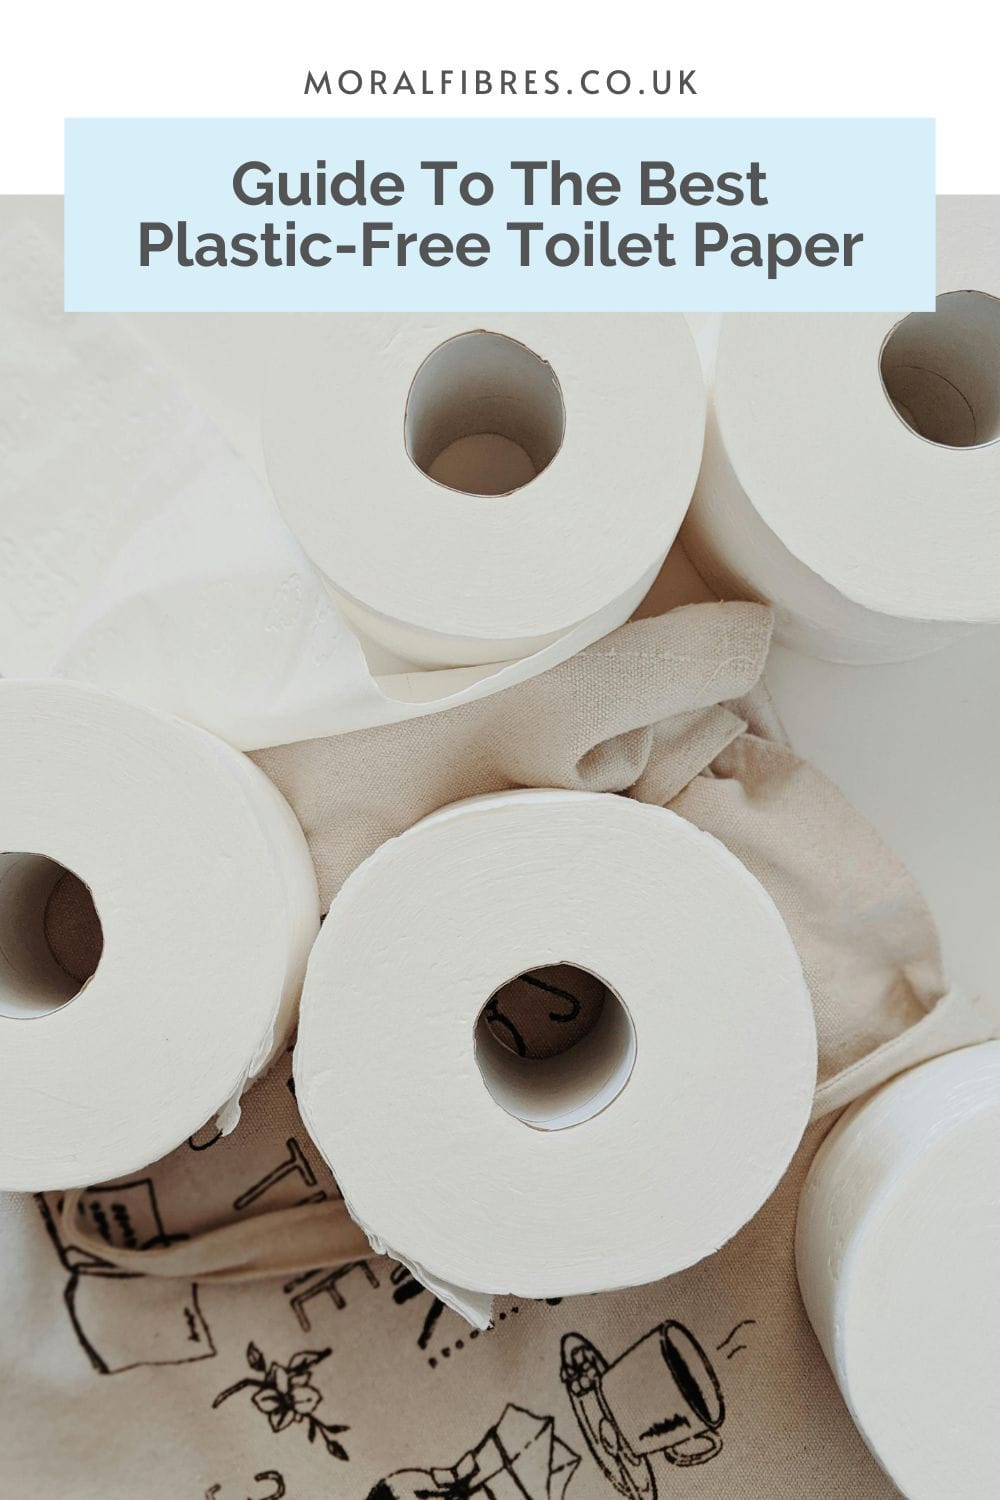 Five toilets roll on a beige background with a blue text box that reads guide to the best plastic-free toilet paper.